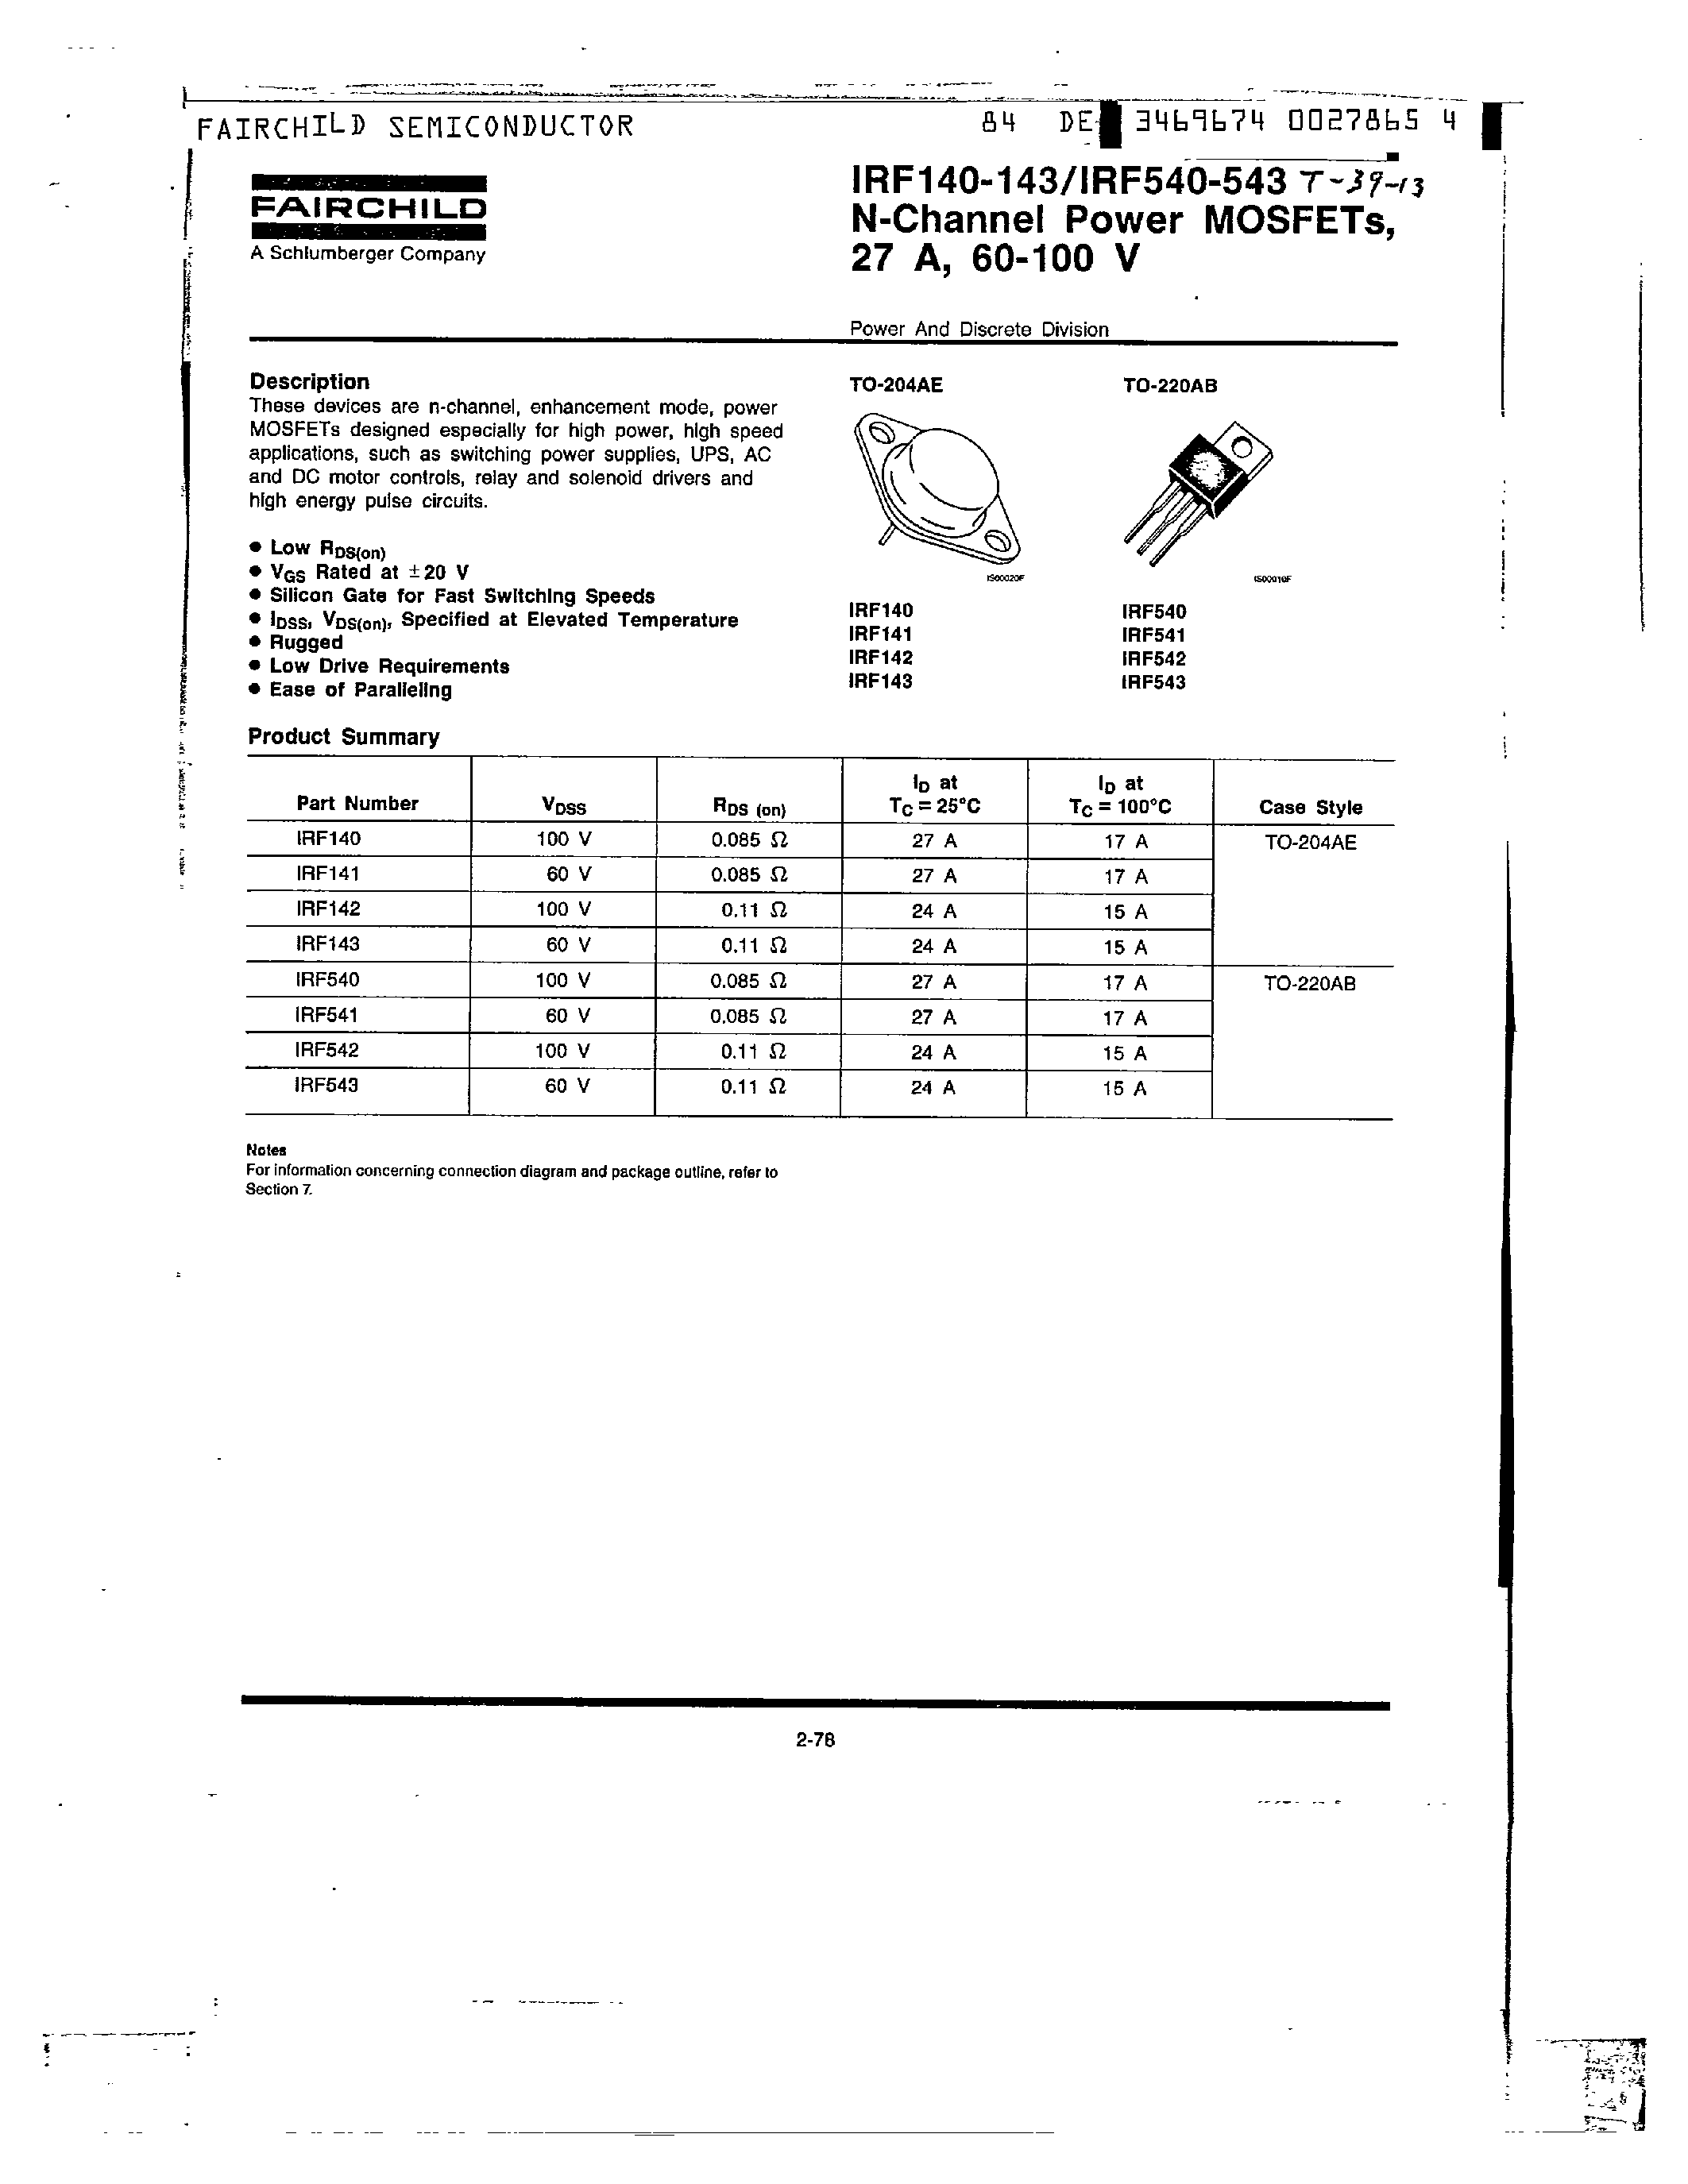 Datasheet IRF101 - N-Channel Power MOSFETs/ 27 A/ 60-100V page 1